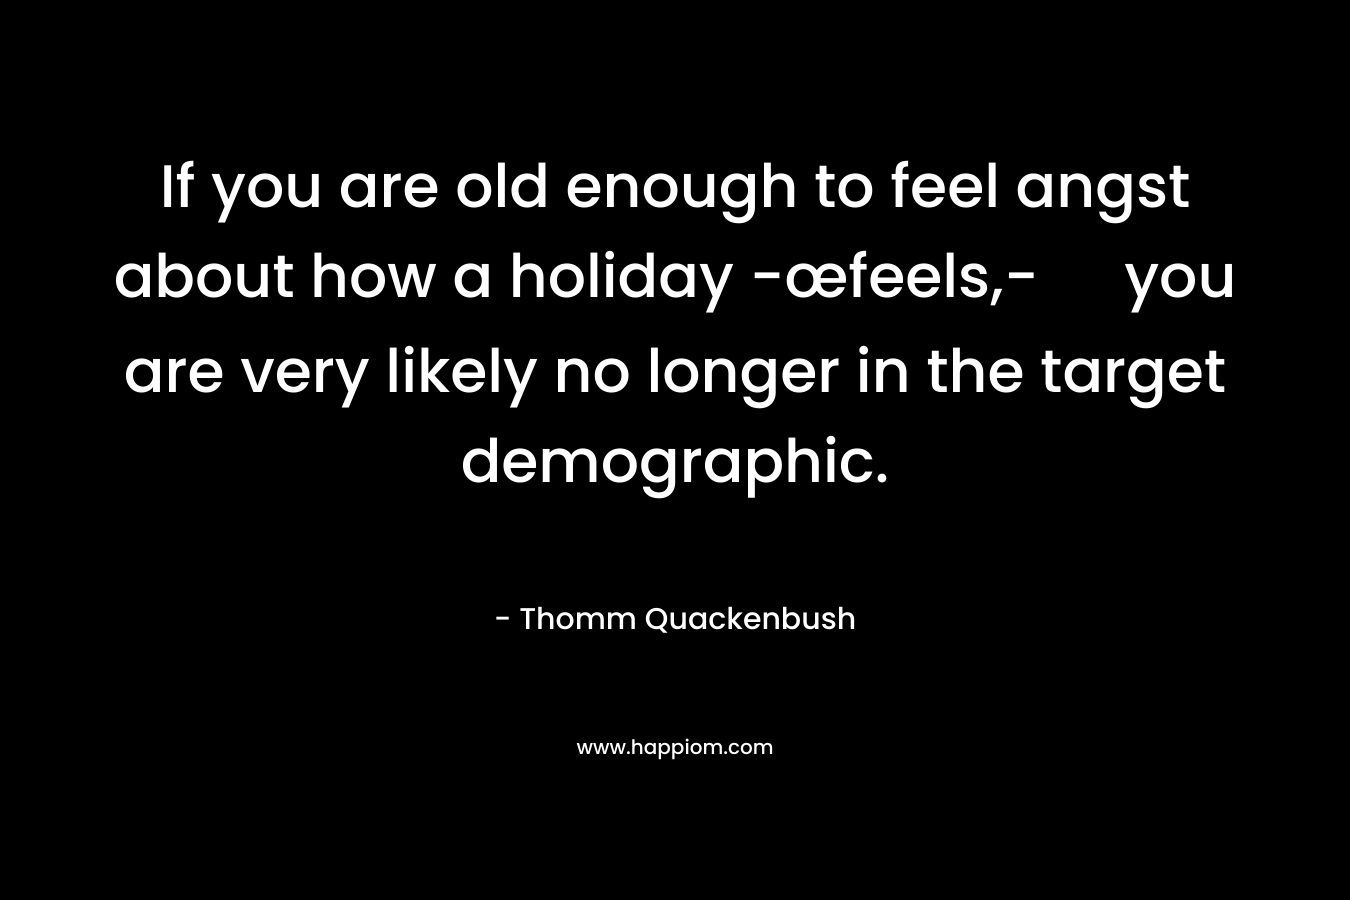 If you are old enough to feel angst about how a holiday -œfeels,- you are very likely no longer in the target demographic. – Thomm Quackenbush